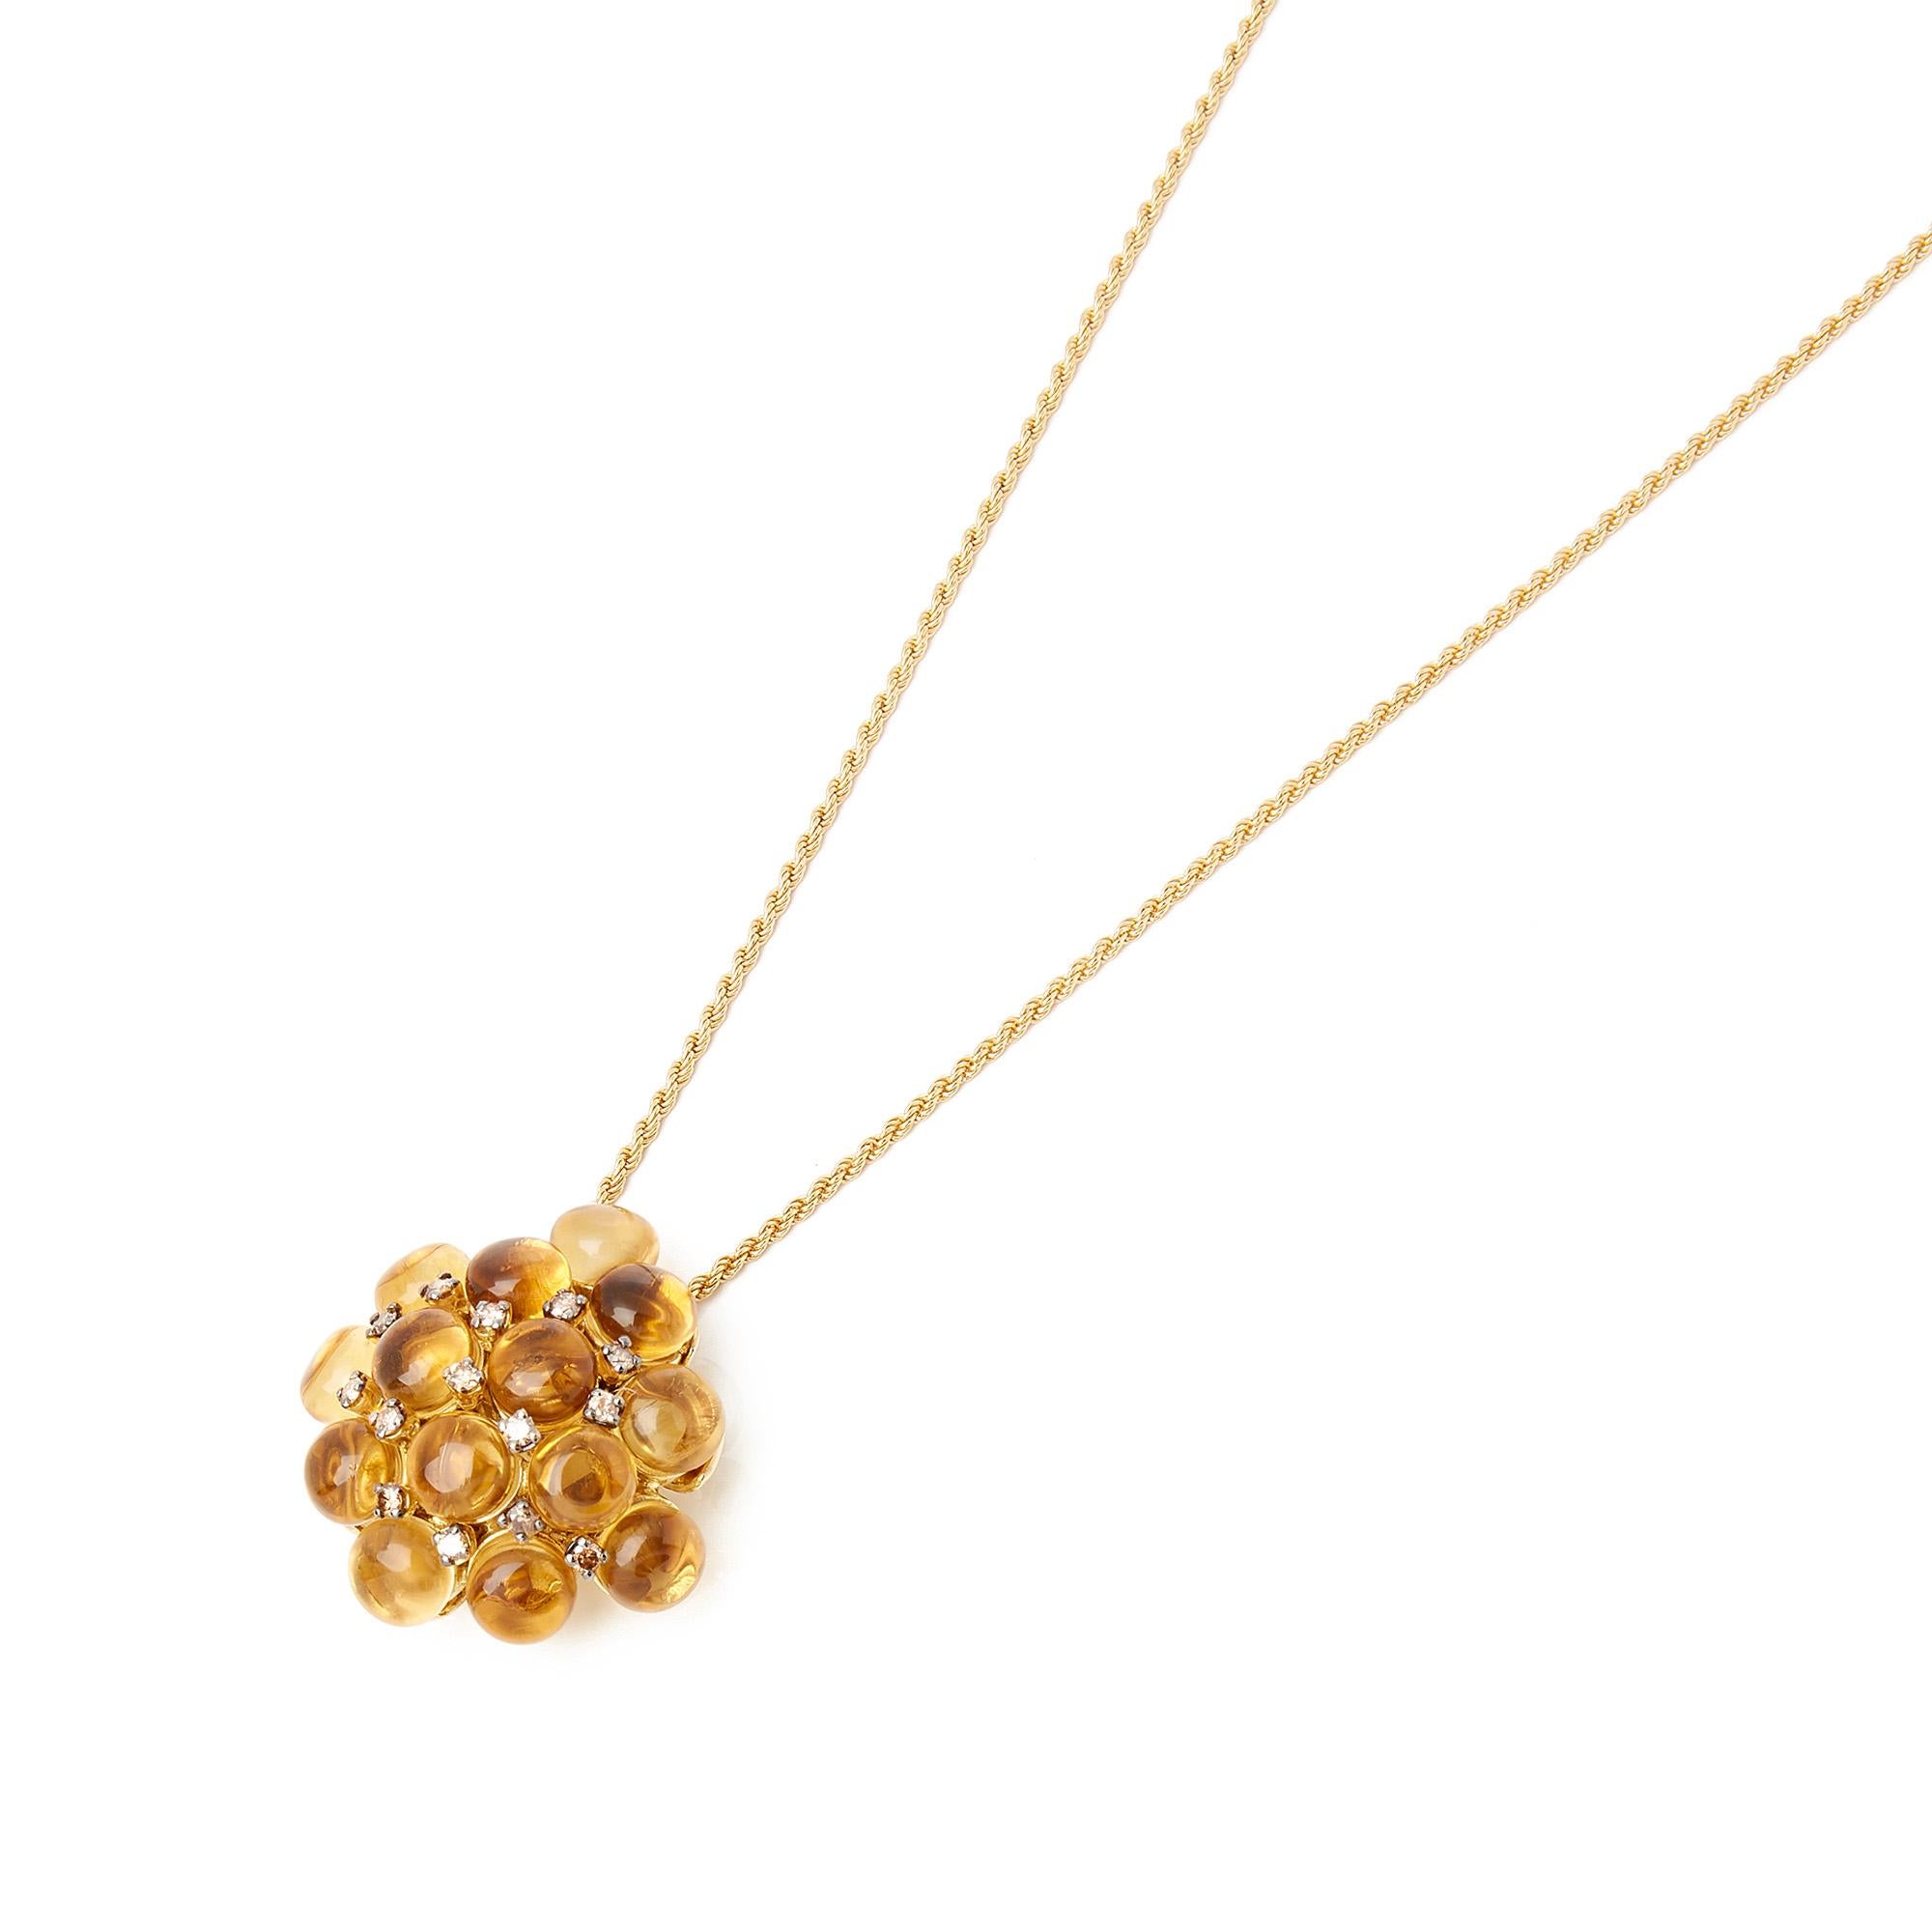 This Pendant Features Fourteen Cabochon Cut Citrines in a scattered design set with Round Brilliant Cut Diamonds Mounted in 18k Yellow Gold. Complete with Xupes Presentation Box. Our Xupes reference is COMJ213 should you need to quote this.